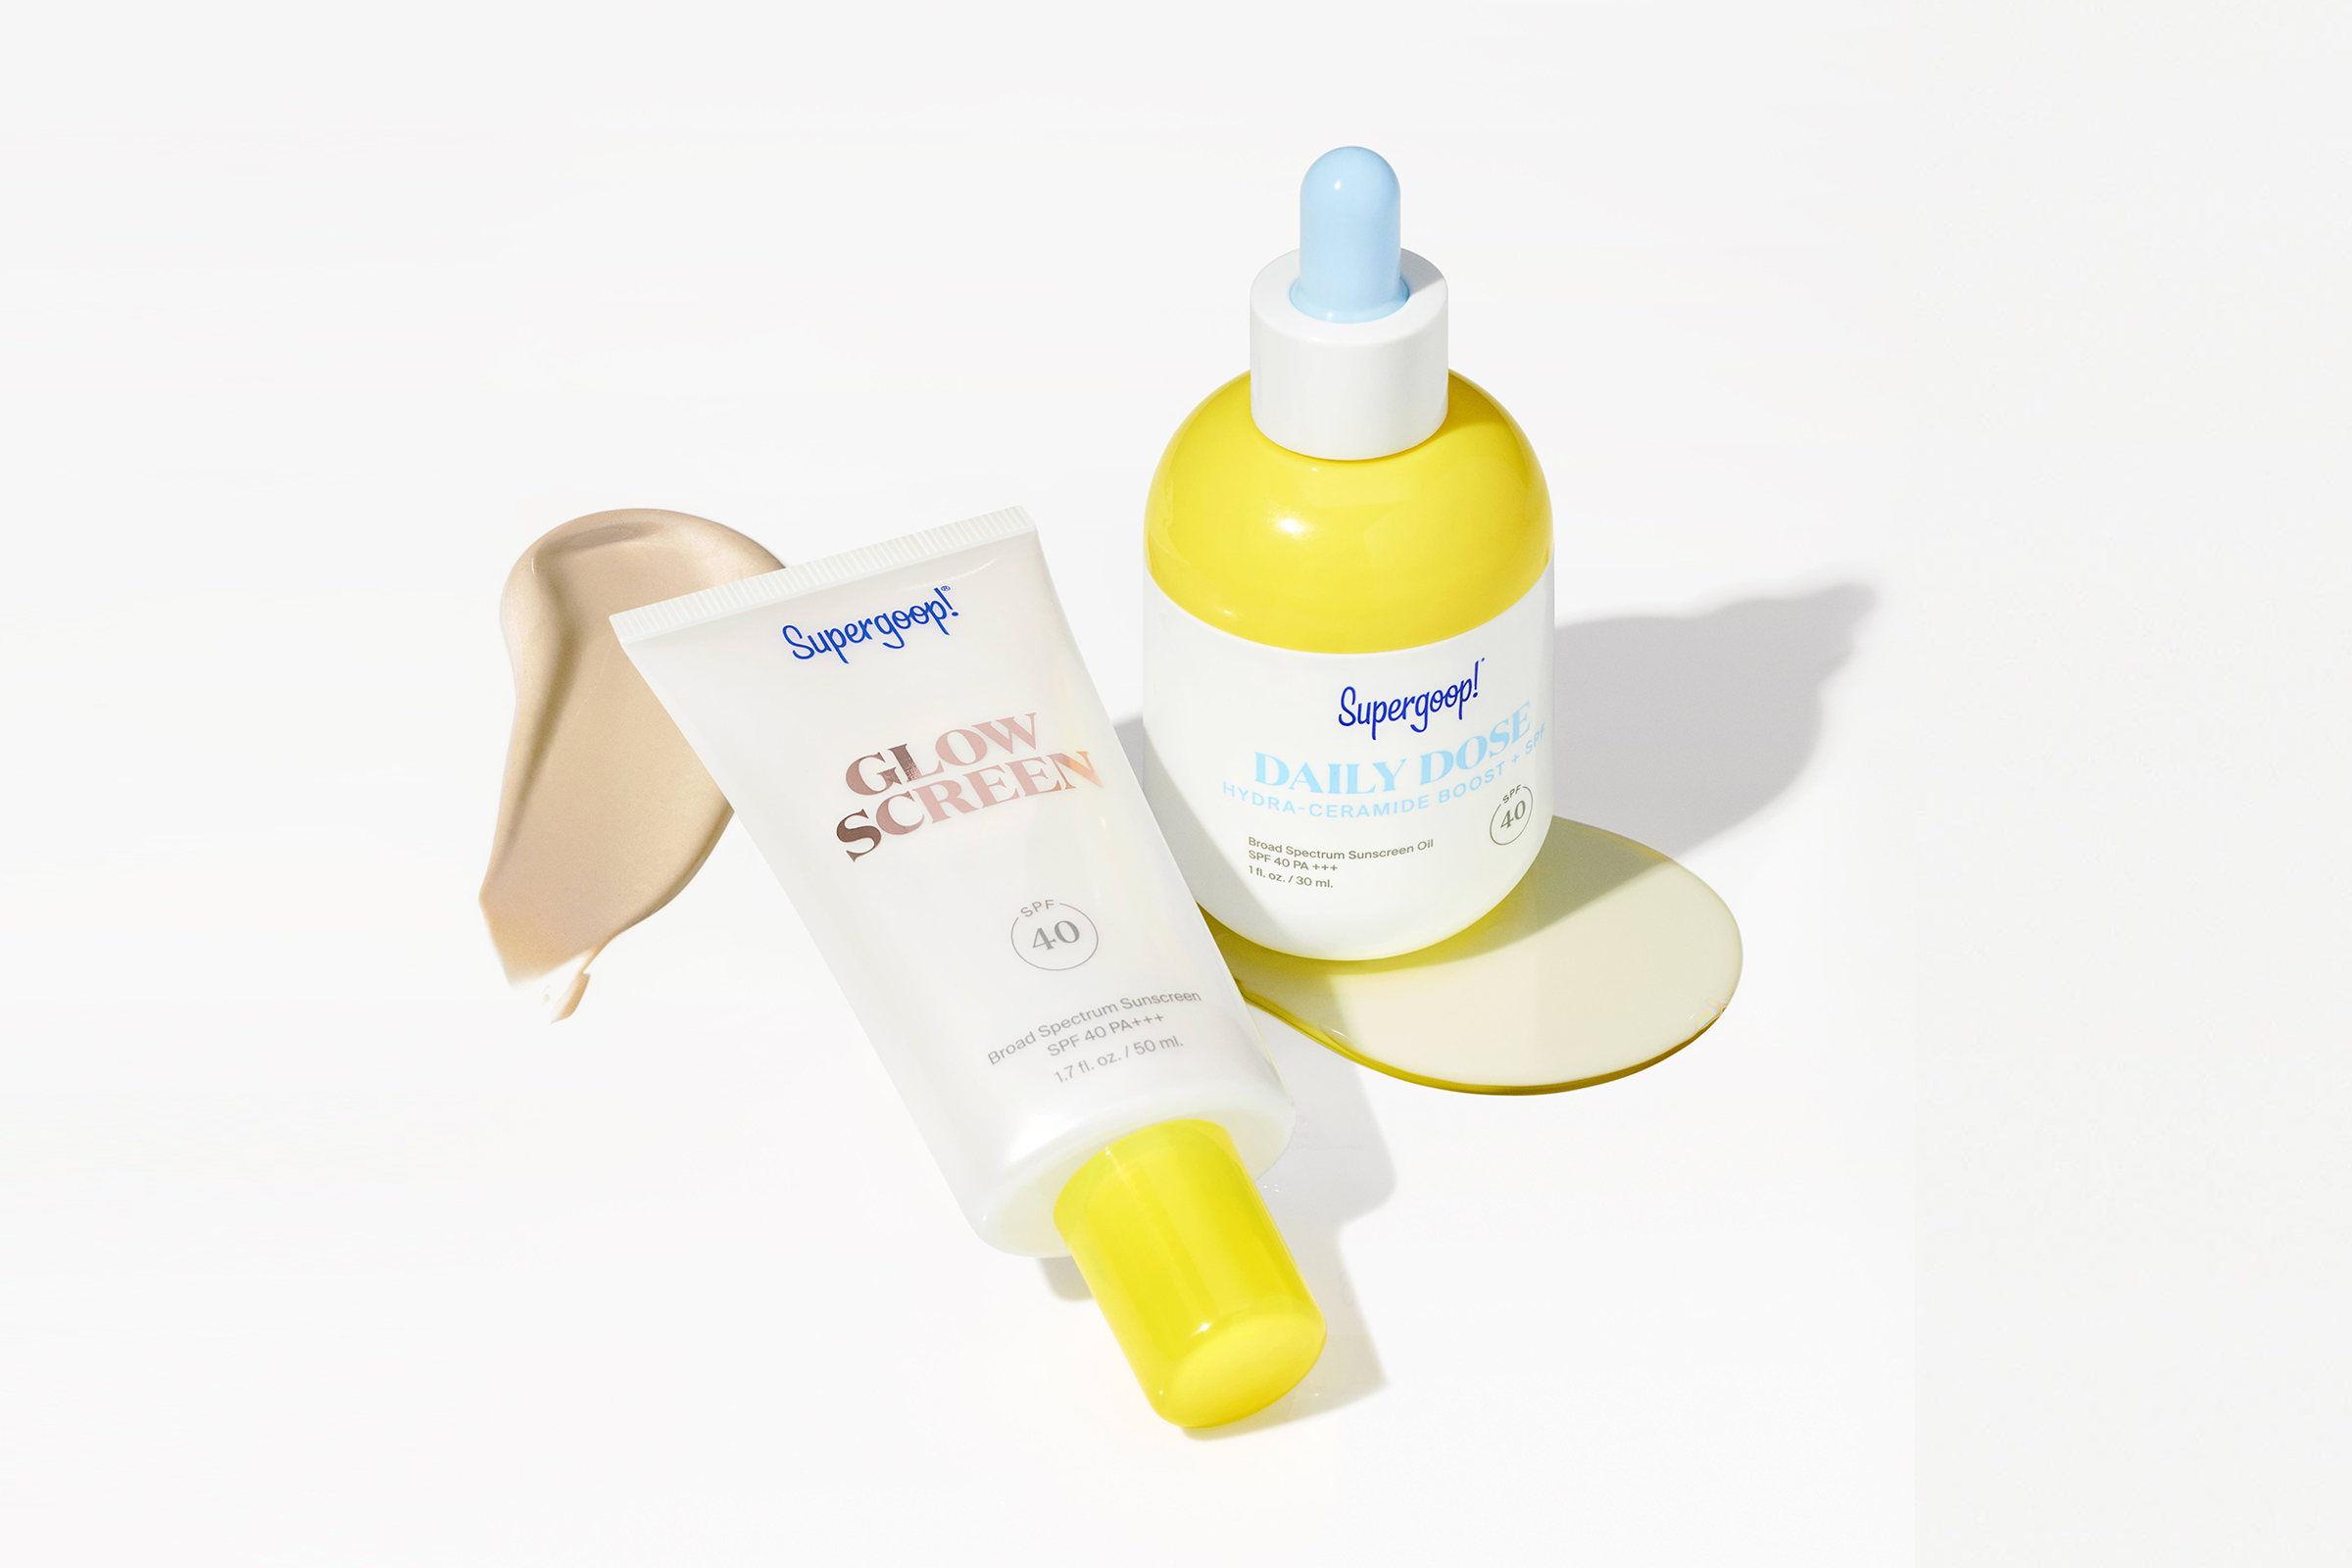 Supergoop's Daily Dose Hydra Caramide Boost SPF40 and Glowscreen SPF40 Duo (Supergoop)